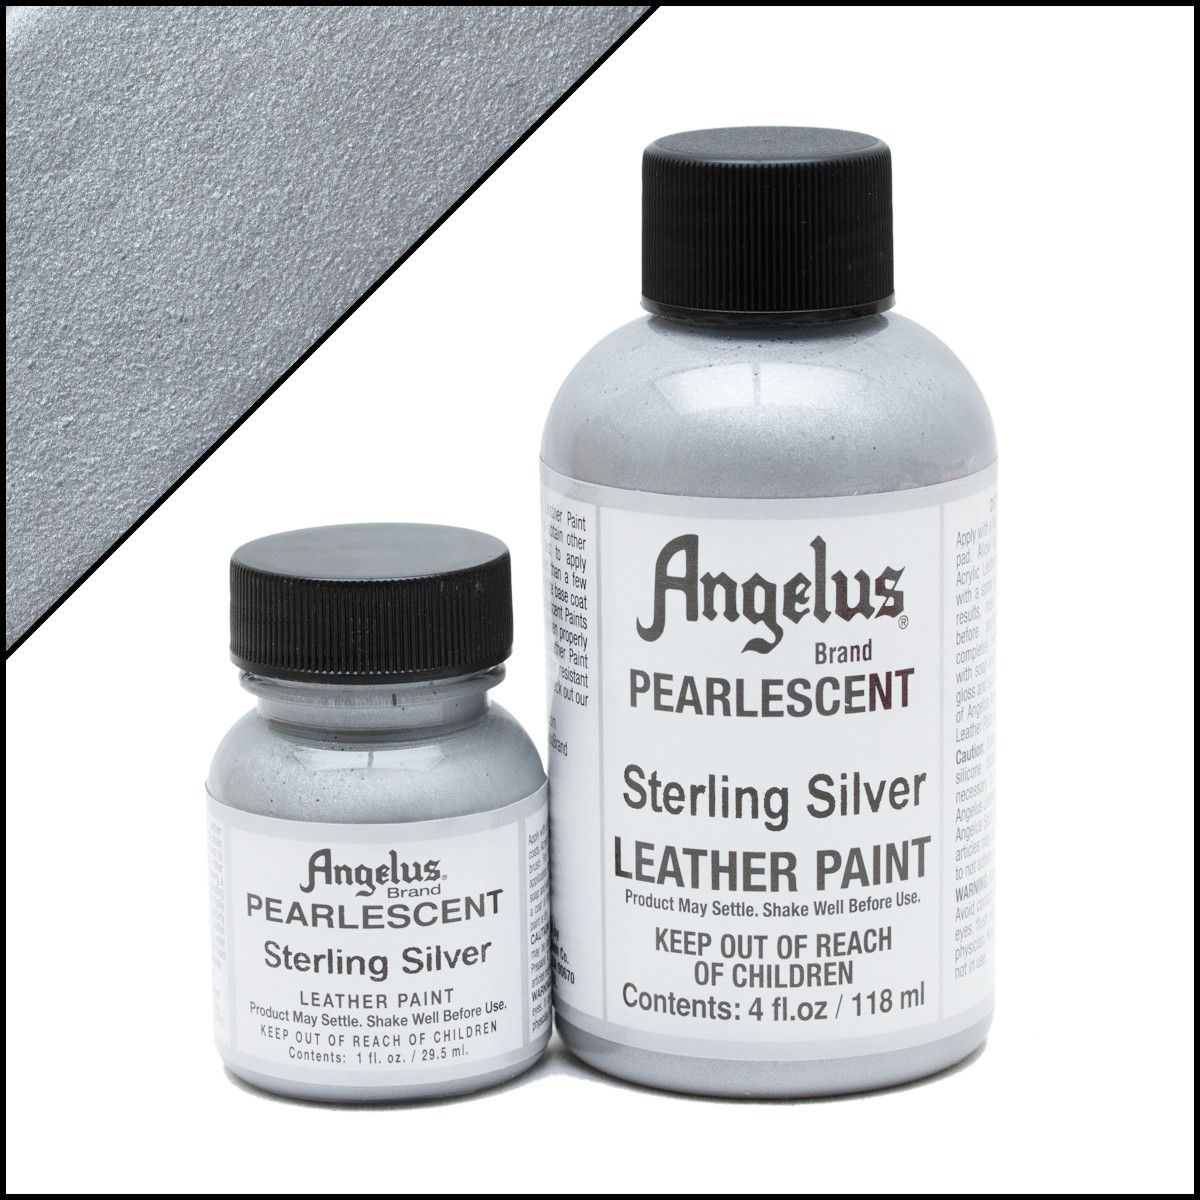 Enhance your Life by Angelus Pearlescent Acrylic Paint Sterling Silver #454  29Ml For Leather, Vinyl, Fabric 958